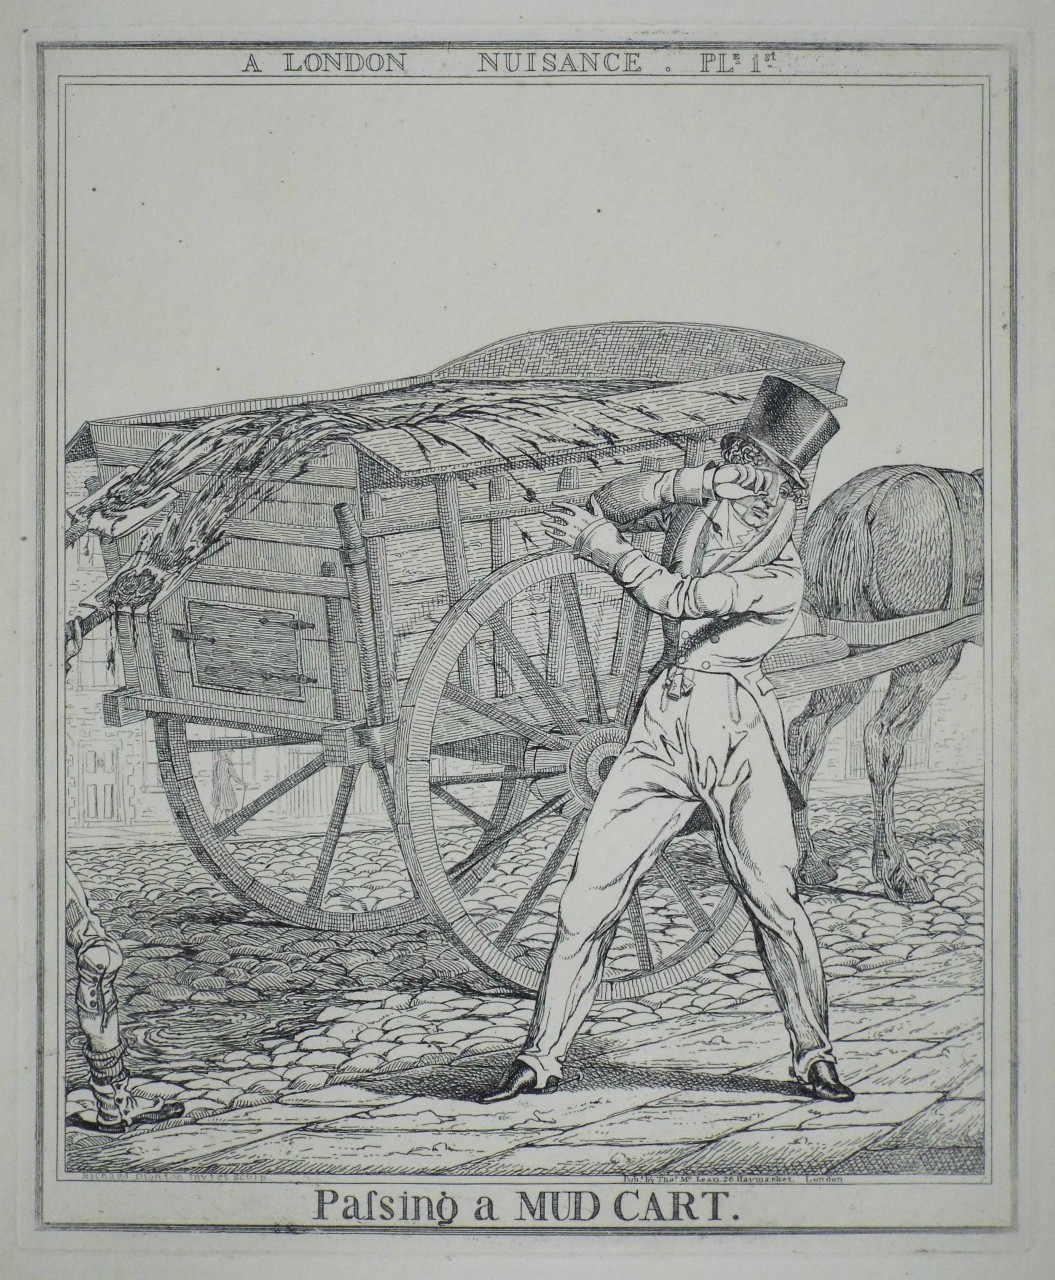 Etching - A London Nuisance. Ple. 1st. Passing a Mud Cart. - Dighton